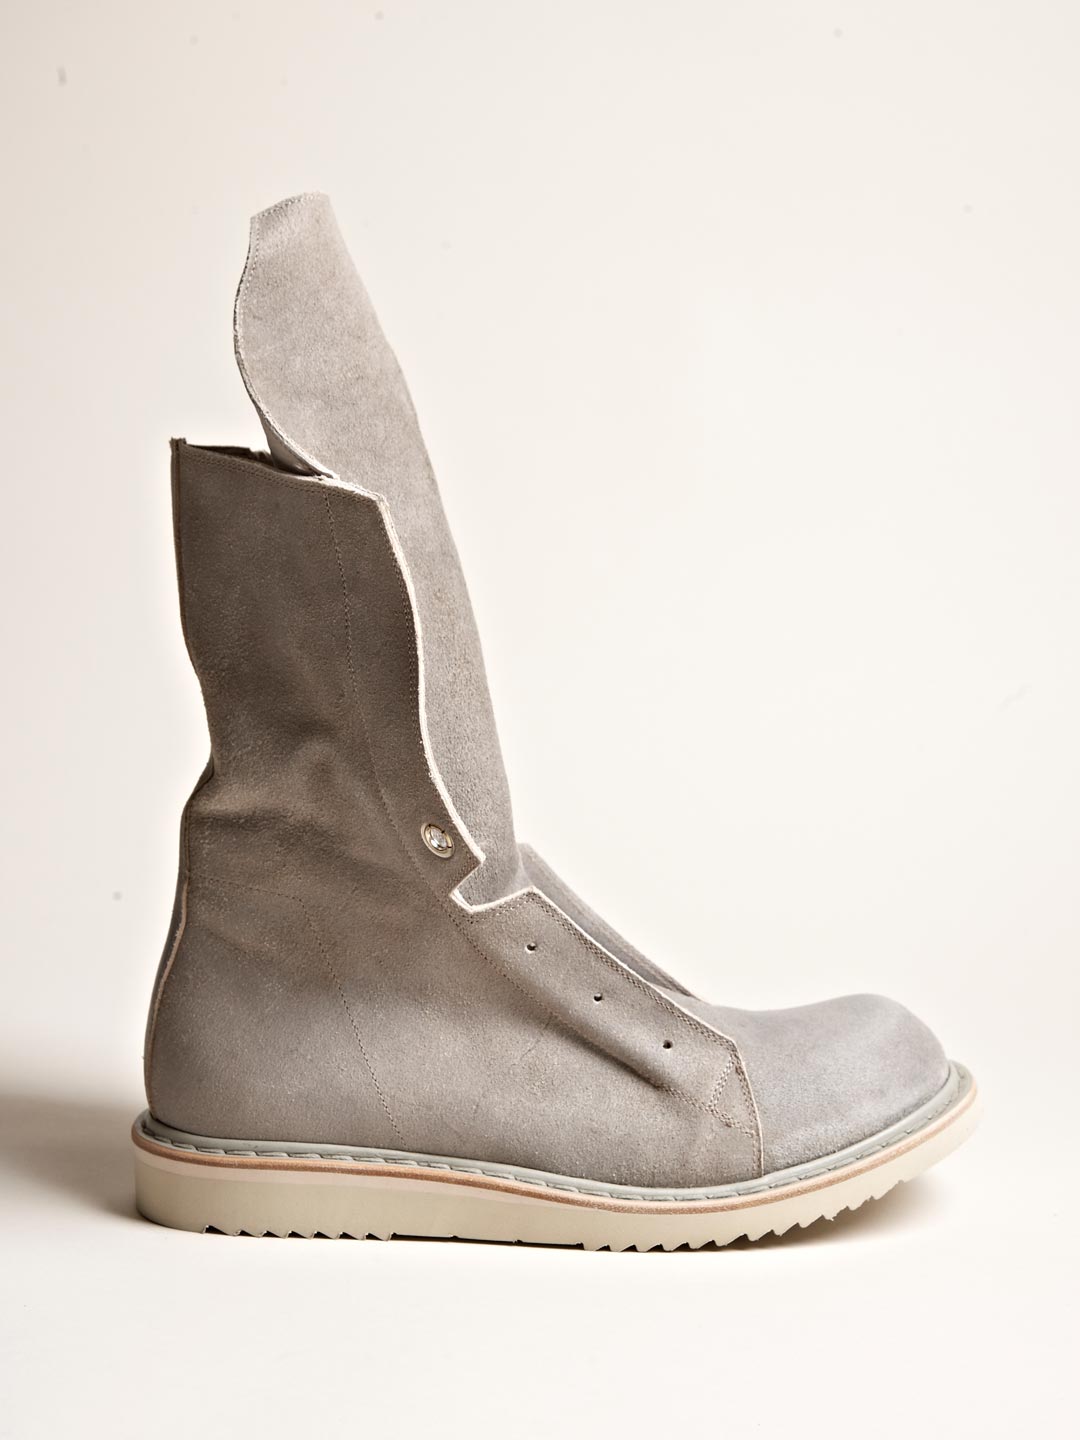 Lyst - Rick Owens Mens Desert Hiking Boots in Natural for Men